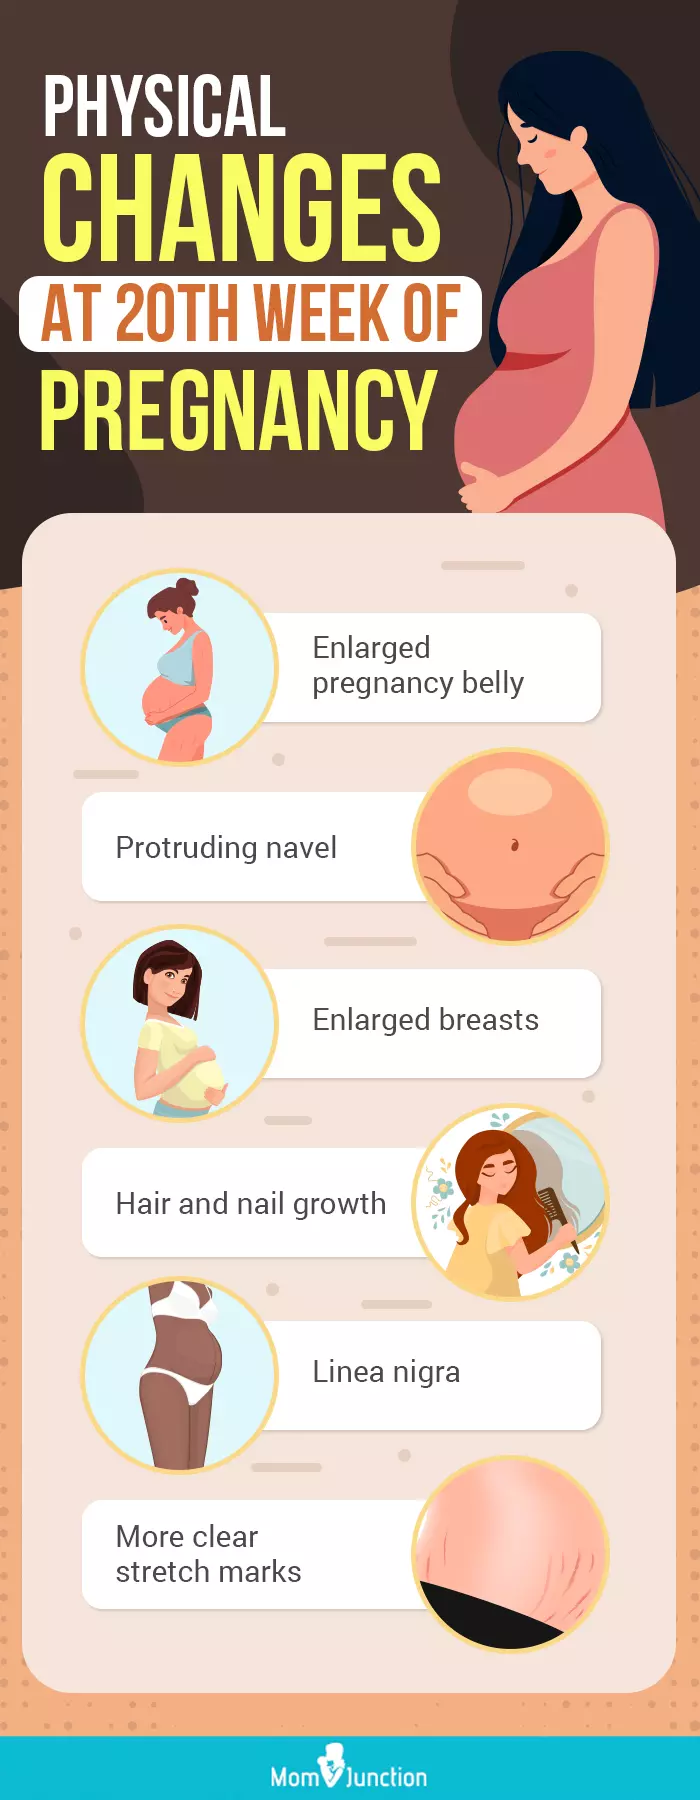 physical changes at 20th week of pregnancy (infographic)